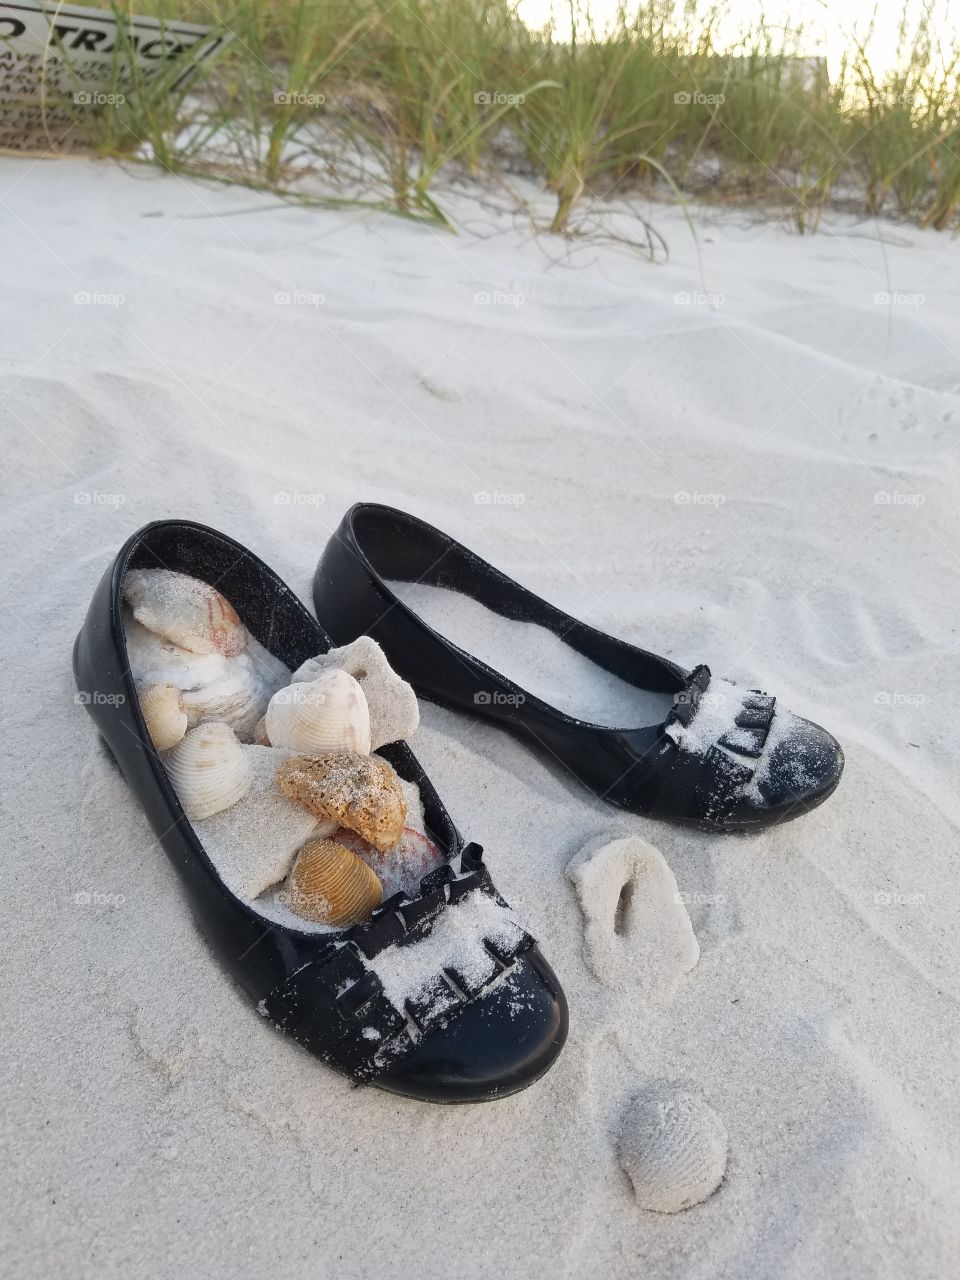 Shells and Shoes